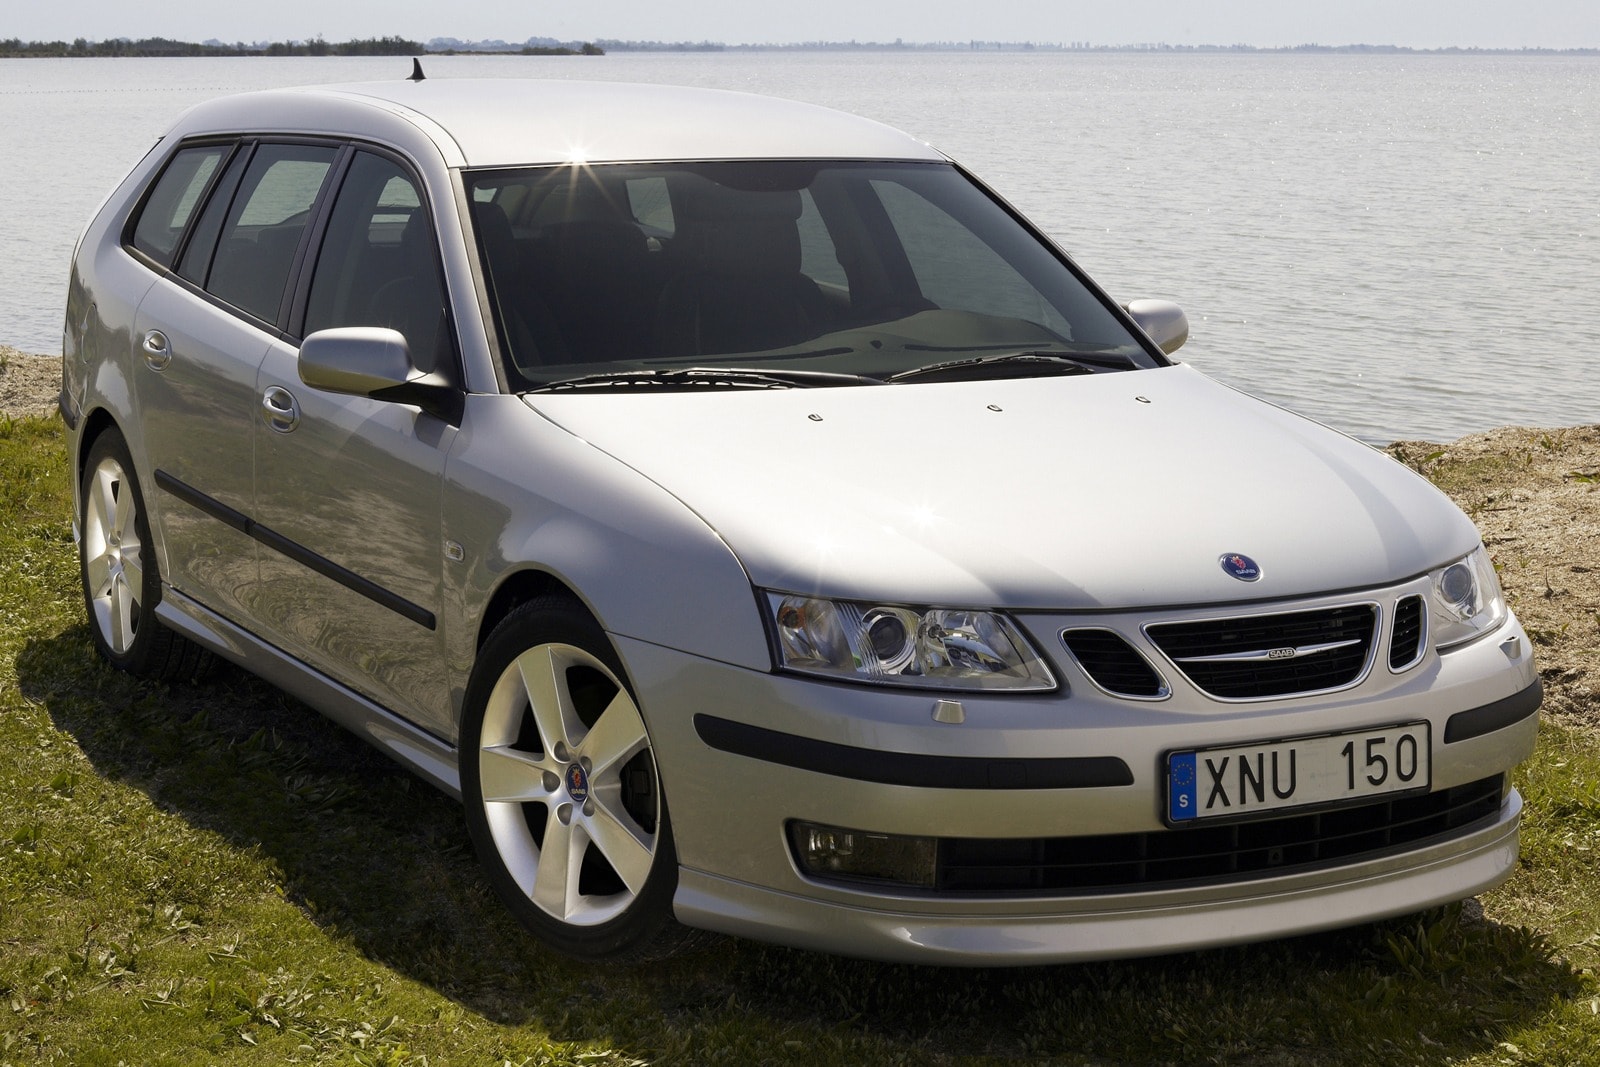 Used 2007 Saab 9-3 Wagon Review | Edmunds